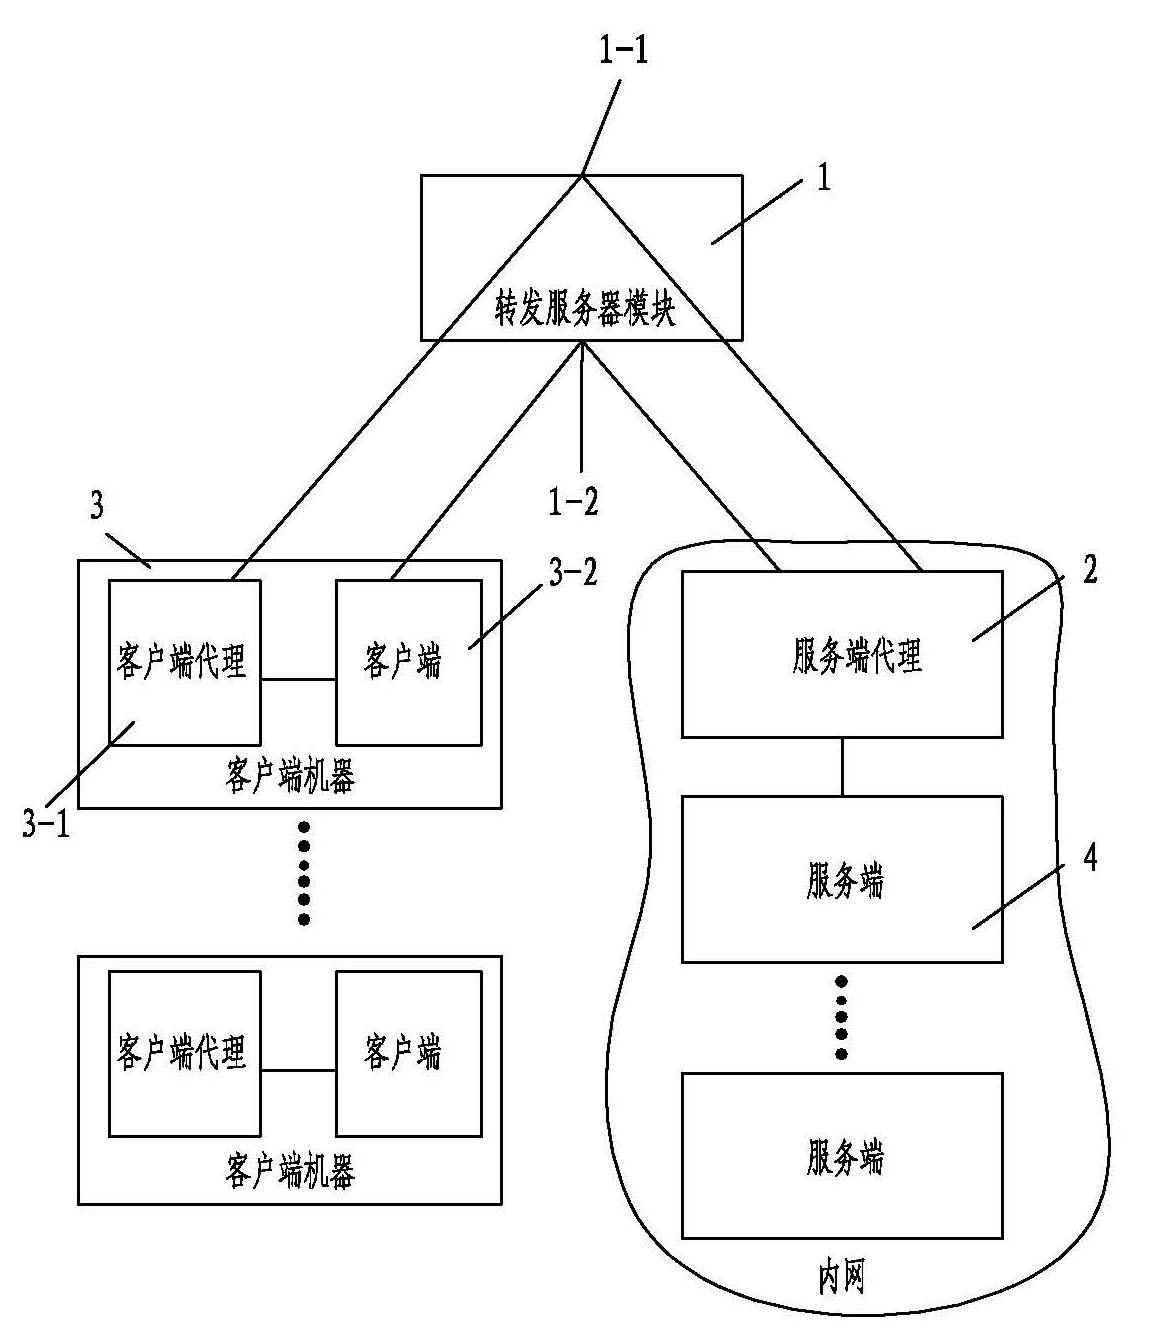 Method for converting TCP network communication server into client